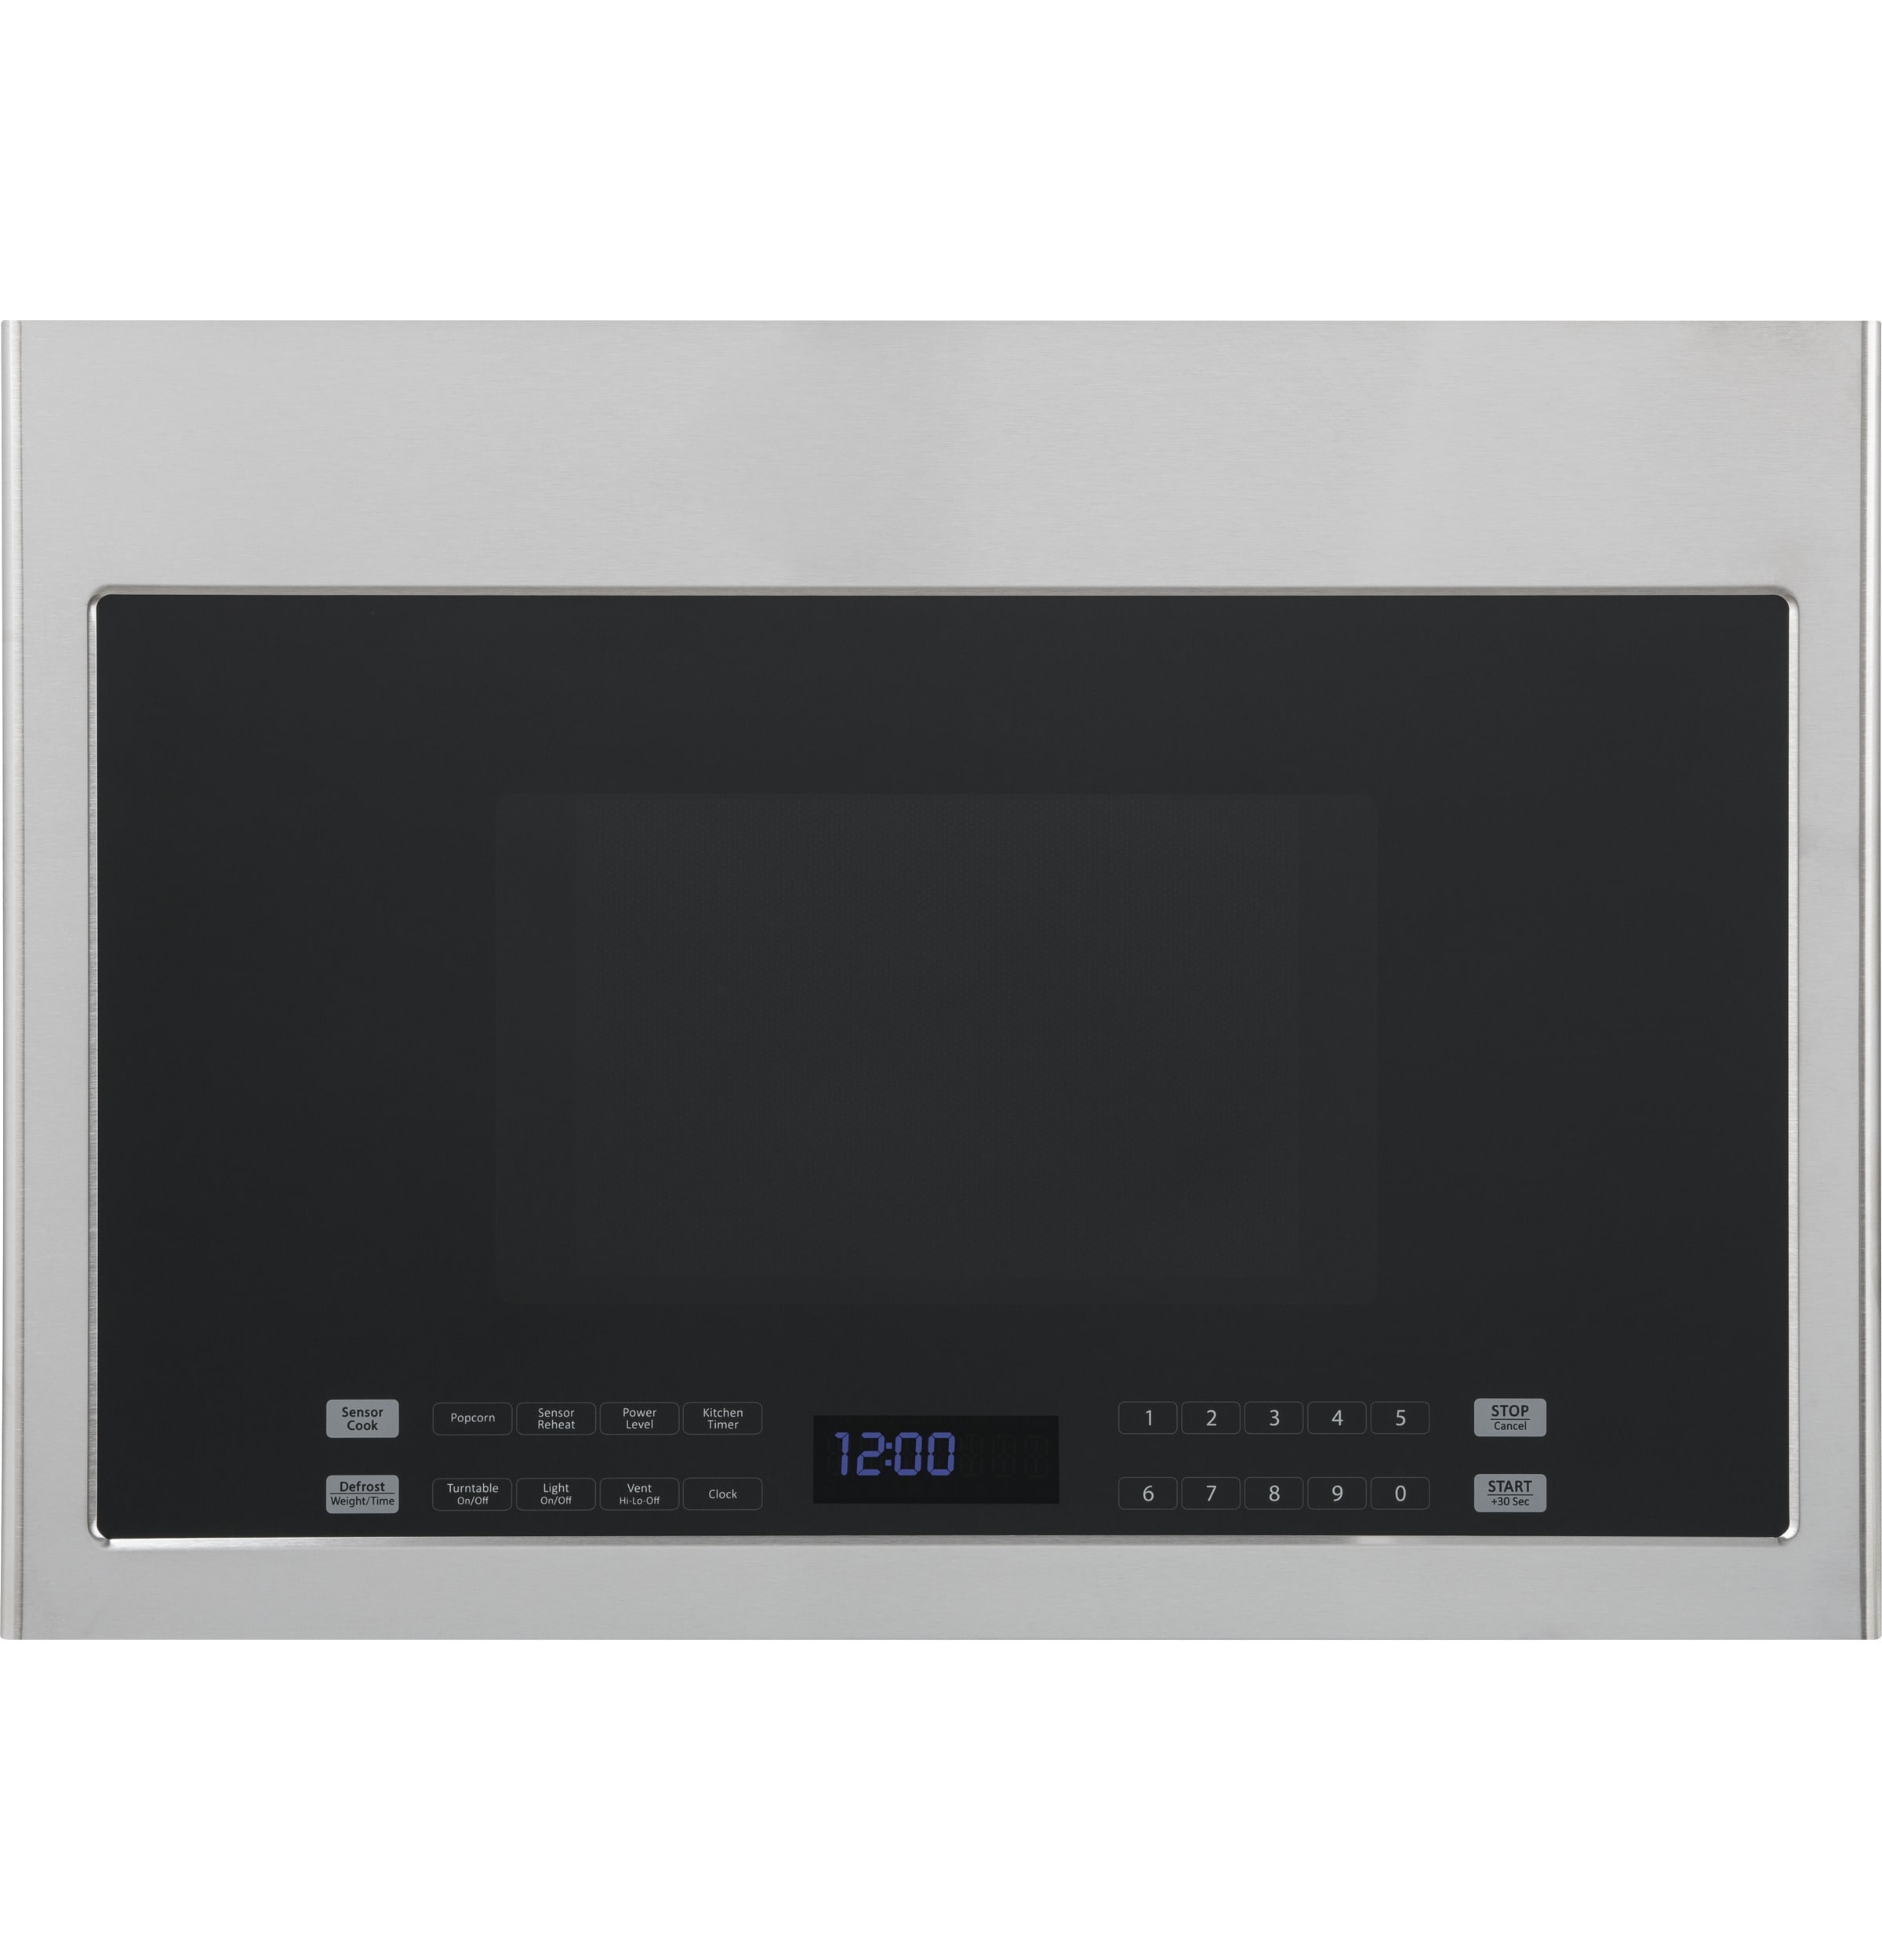 Smart Over-the-Range Wholesale car microwave oven 